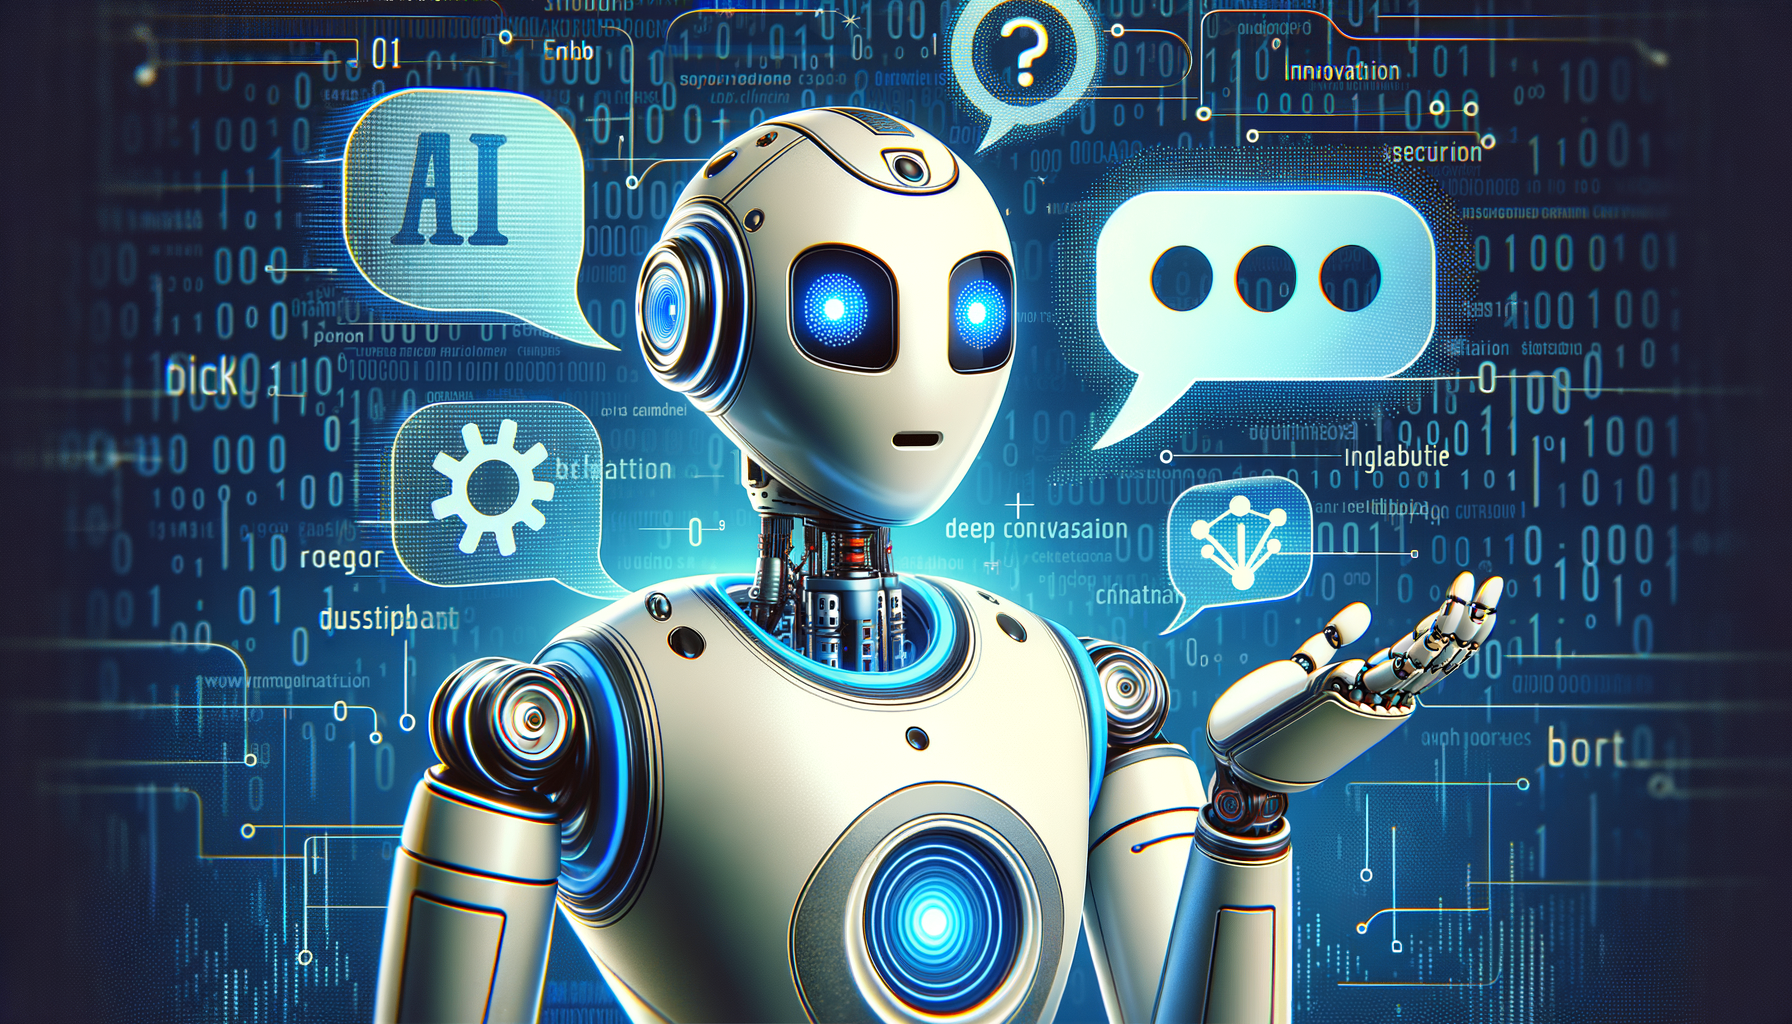 “Claude 3: New AI Outshines ChatGPT by Perfecting Natural Conversation”